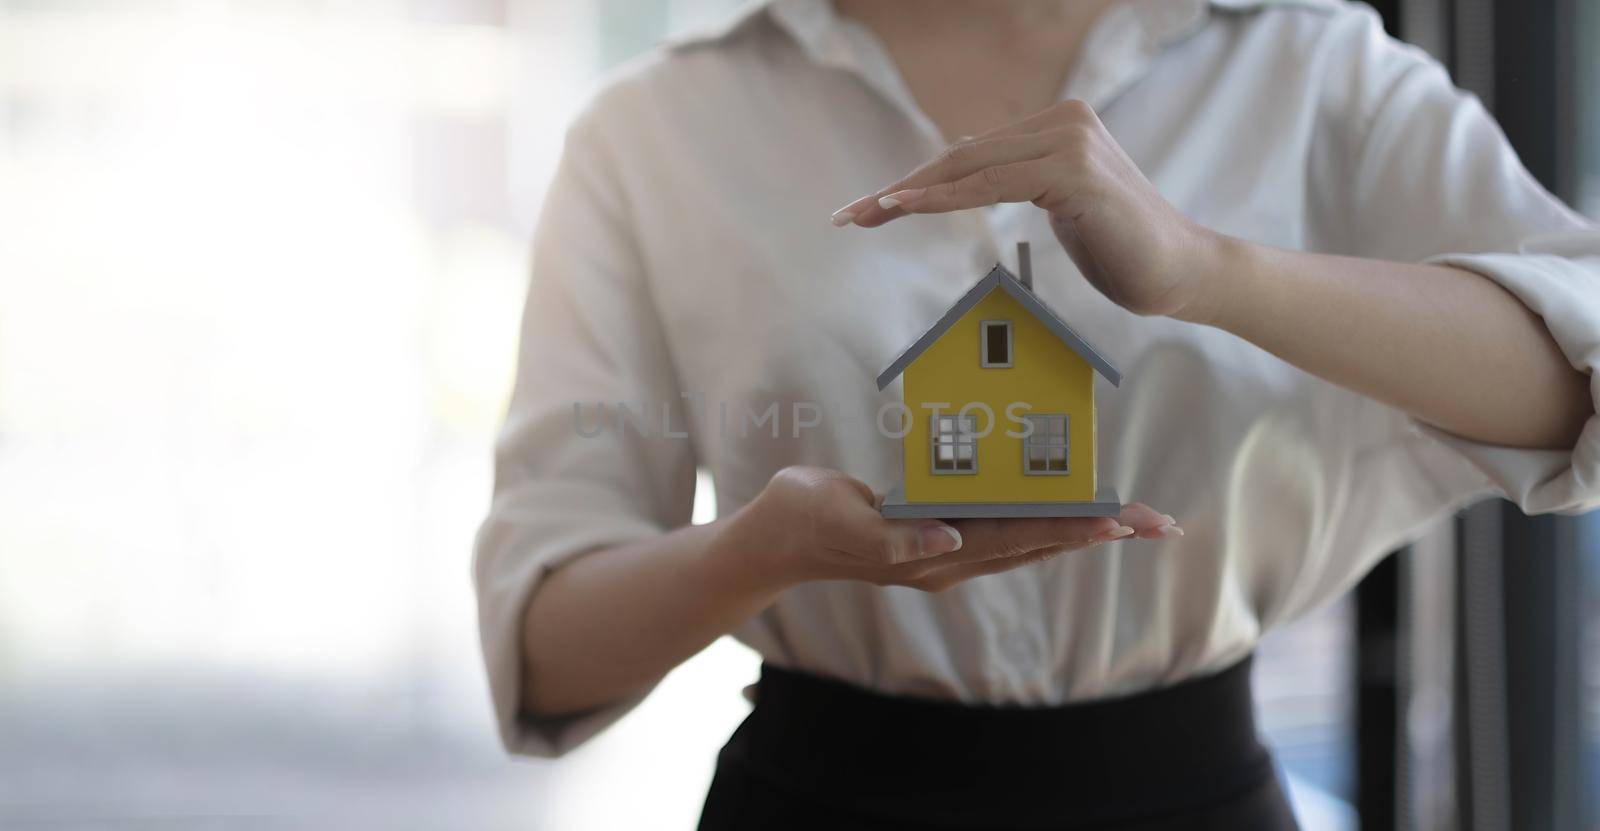 real estate agent use their hands to protect the red roofs, the concept of protecting houses using the gestures and symbols of real estate investors, taking care of credit and contracts..